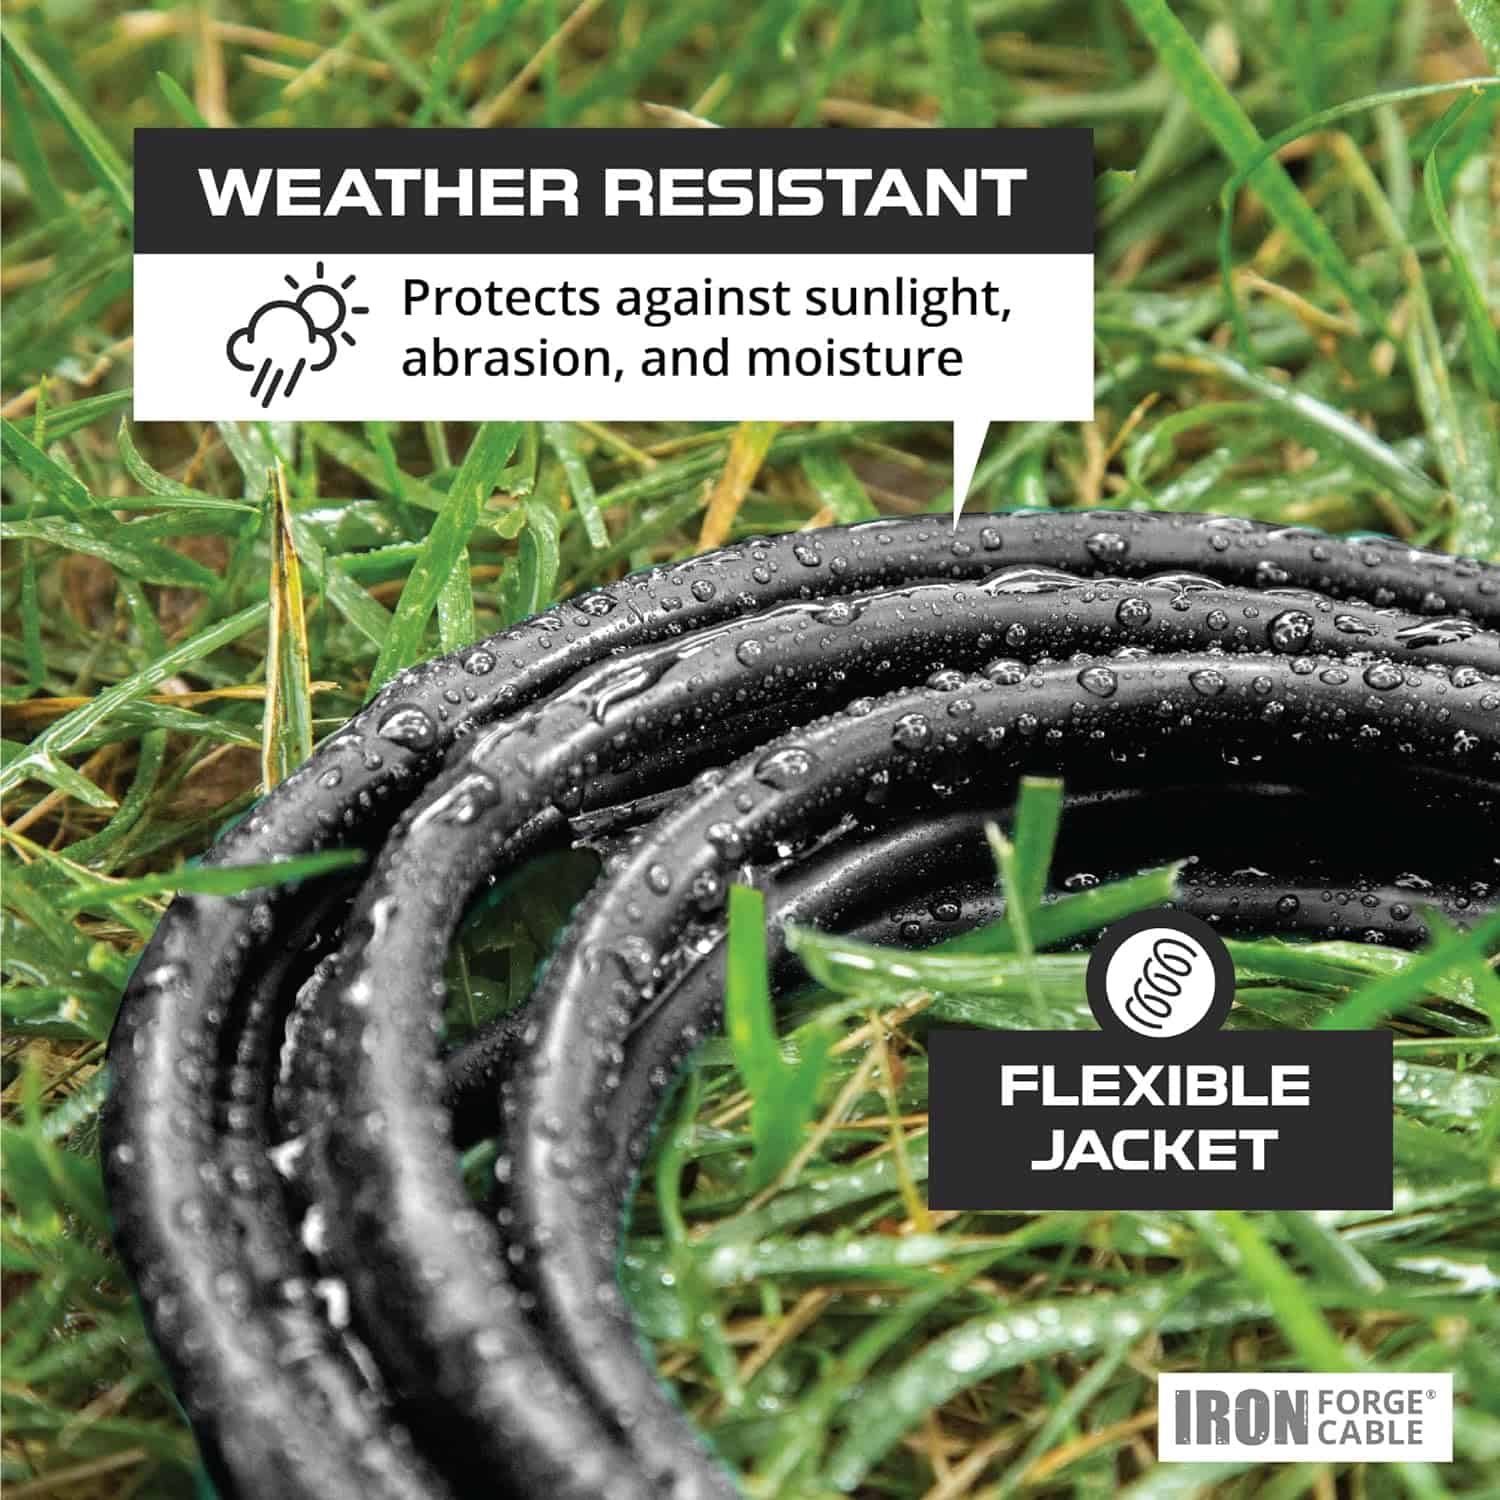 Iron Forge 10 Ft Heavy Duty Extension Cord Outdoor, SJTOW Oil Resistant 12 Gauge Extension Cord 10ft with 3 Prong, 12 3 Black Extension Cord Great for Farm, Ranch, Workshop – 15 AMP, US Veteran Owned 3